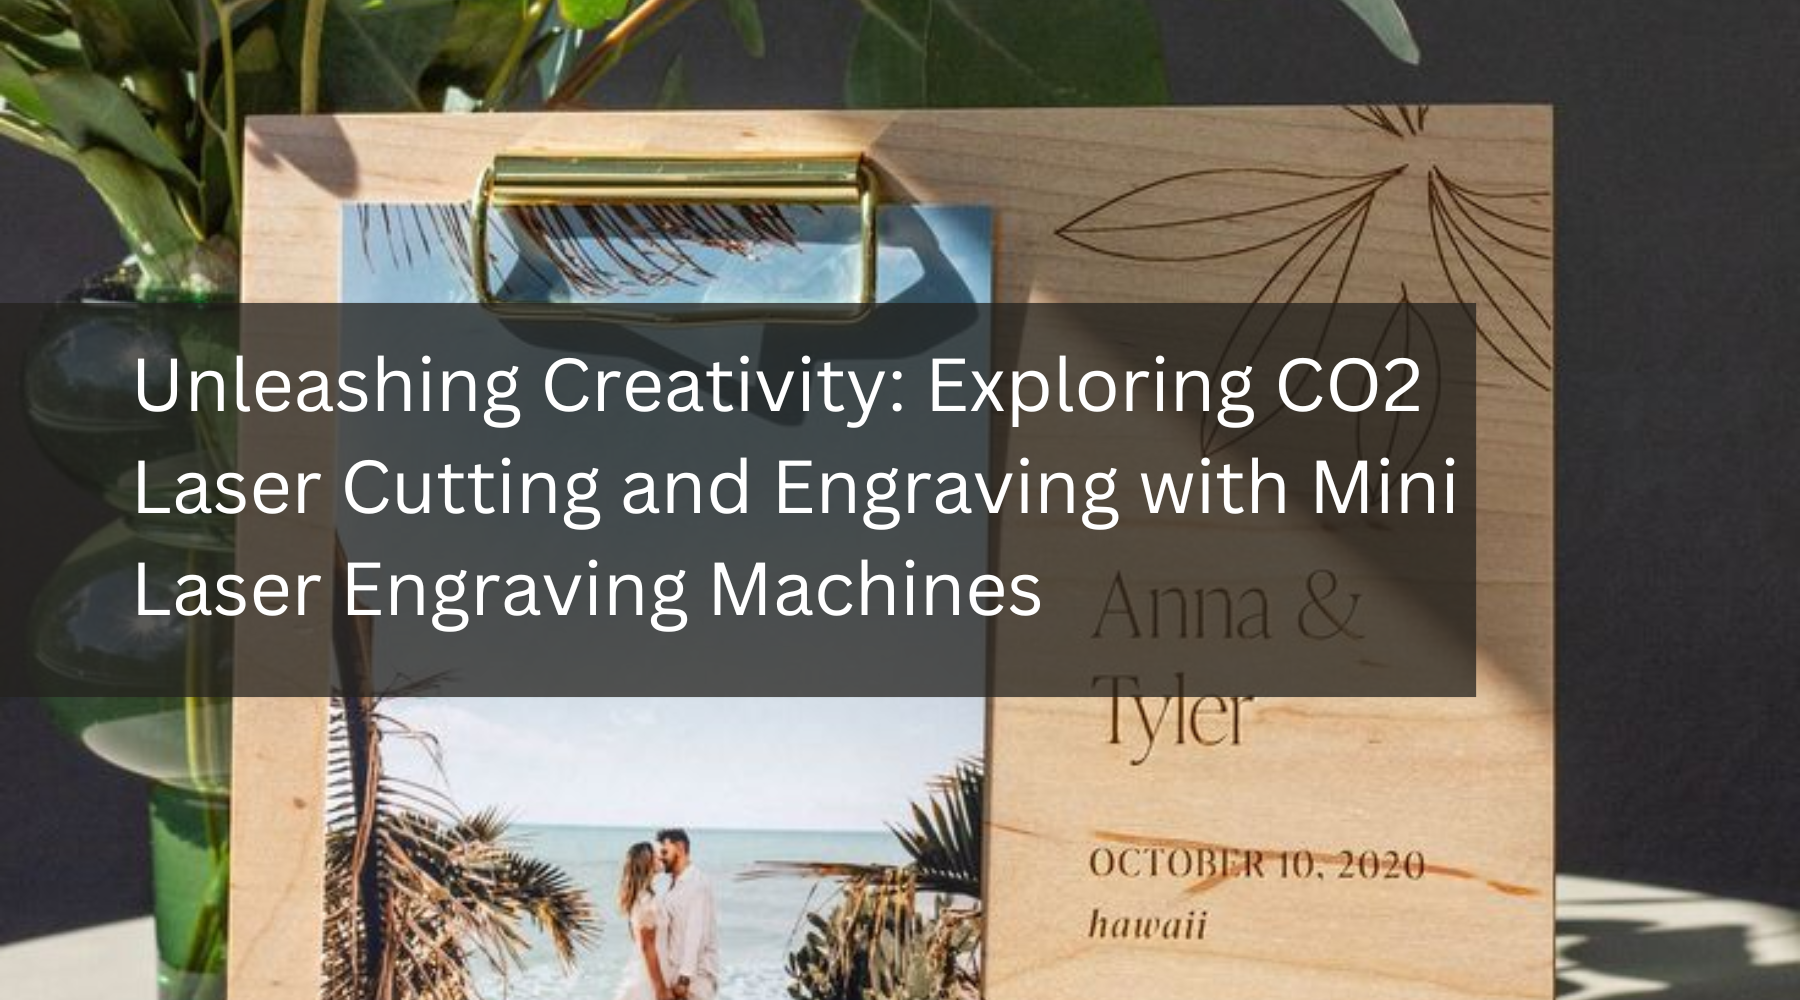 Unleashing Creativity: Exploring CO2 Laser Cutting and Engraving with Mini Laser Engraving Machines